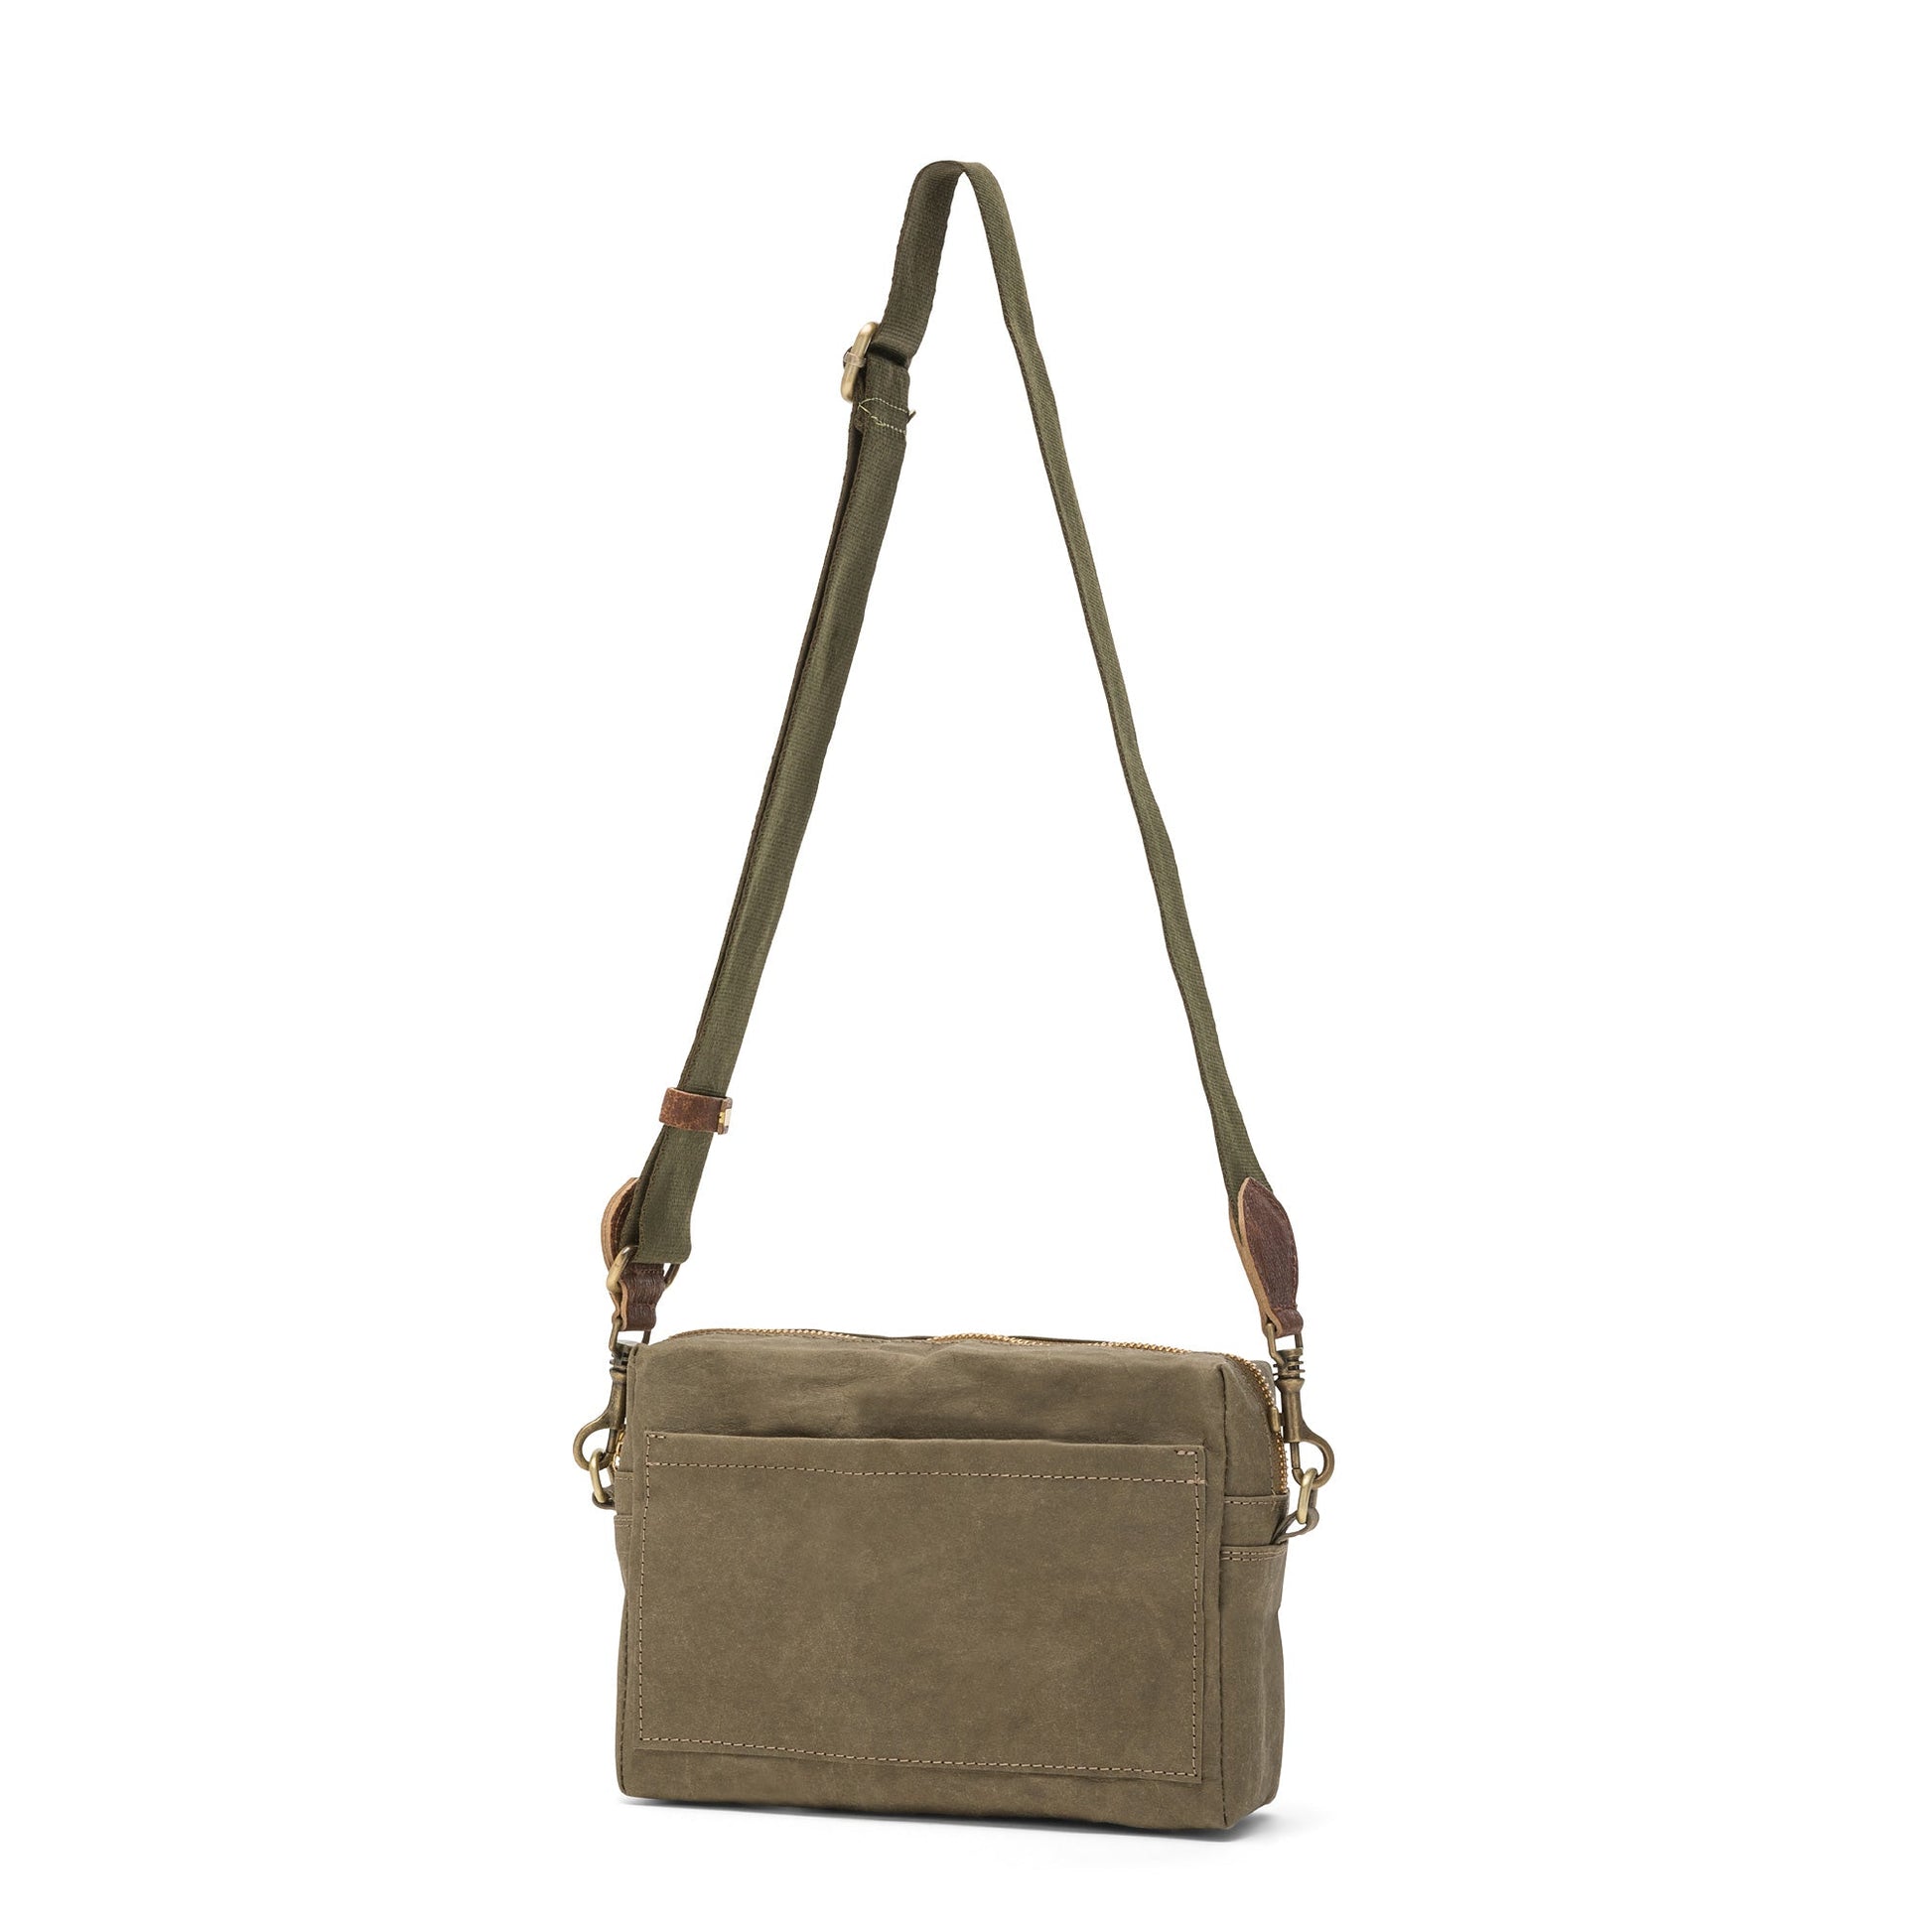 A rectangular washable paper handbag with an external side pocket is shown. The bag has a canvas strap, washable paper details and metal fastening clips to attach the straps to the bag. The bag closes by a zip. The bag shown is olive with an olive strap.